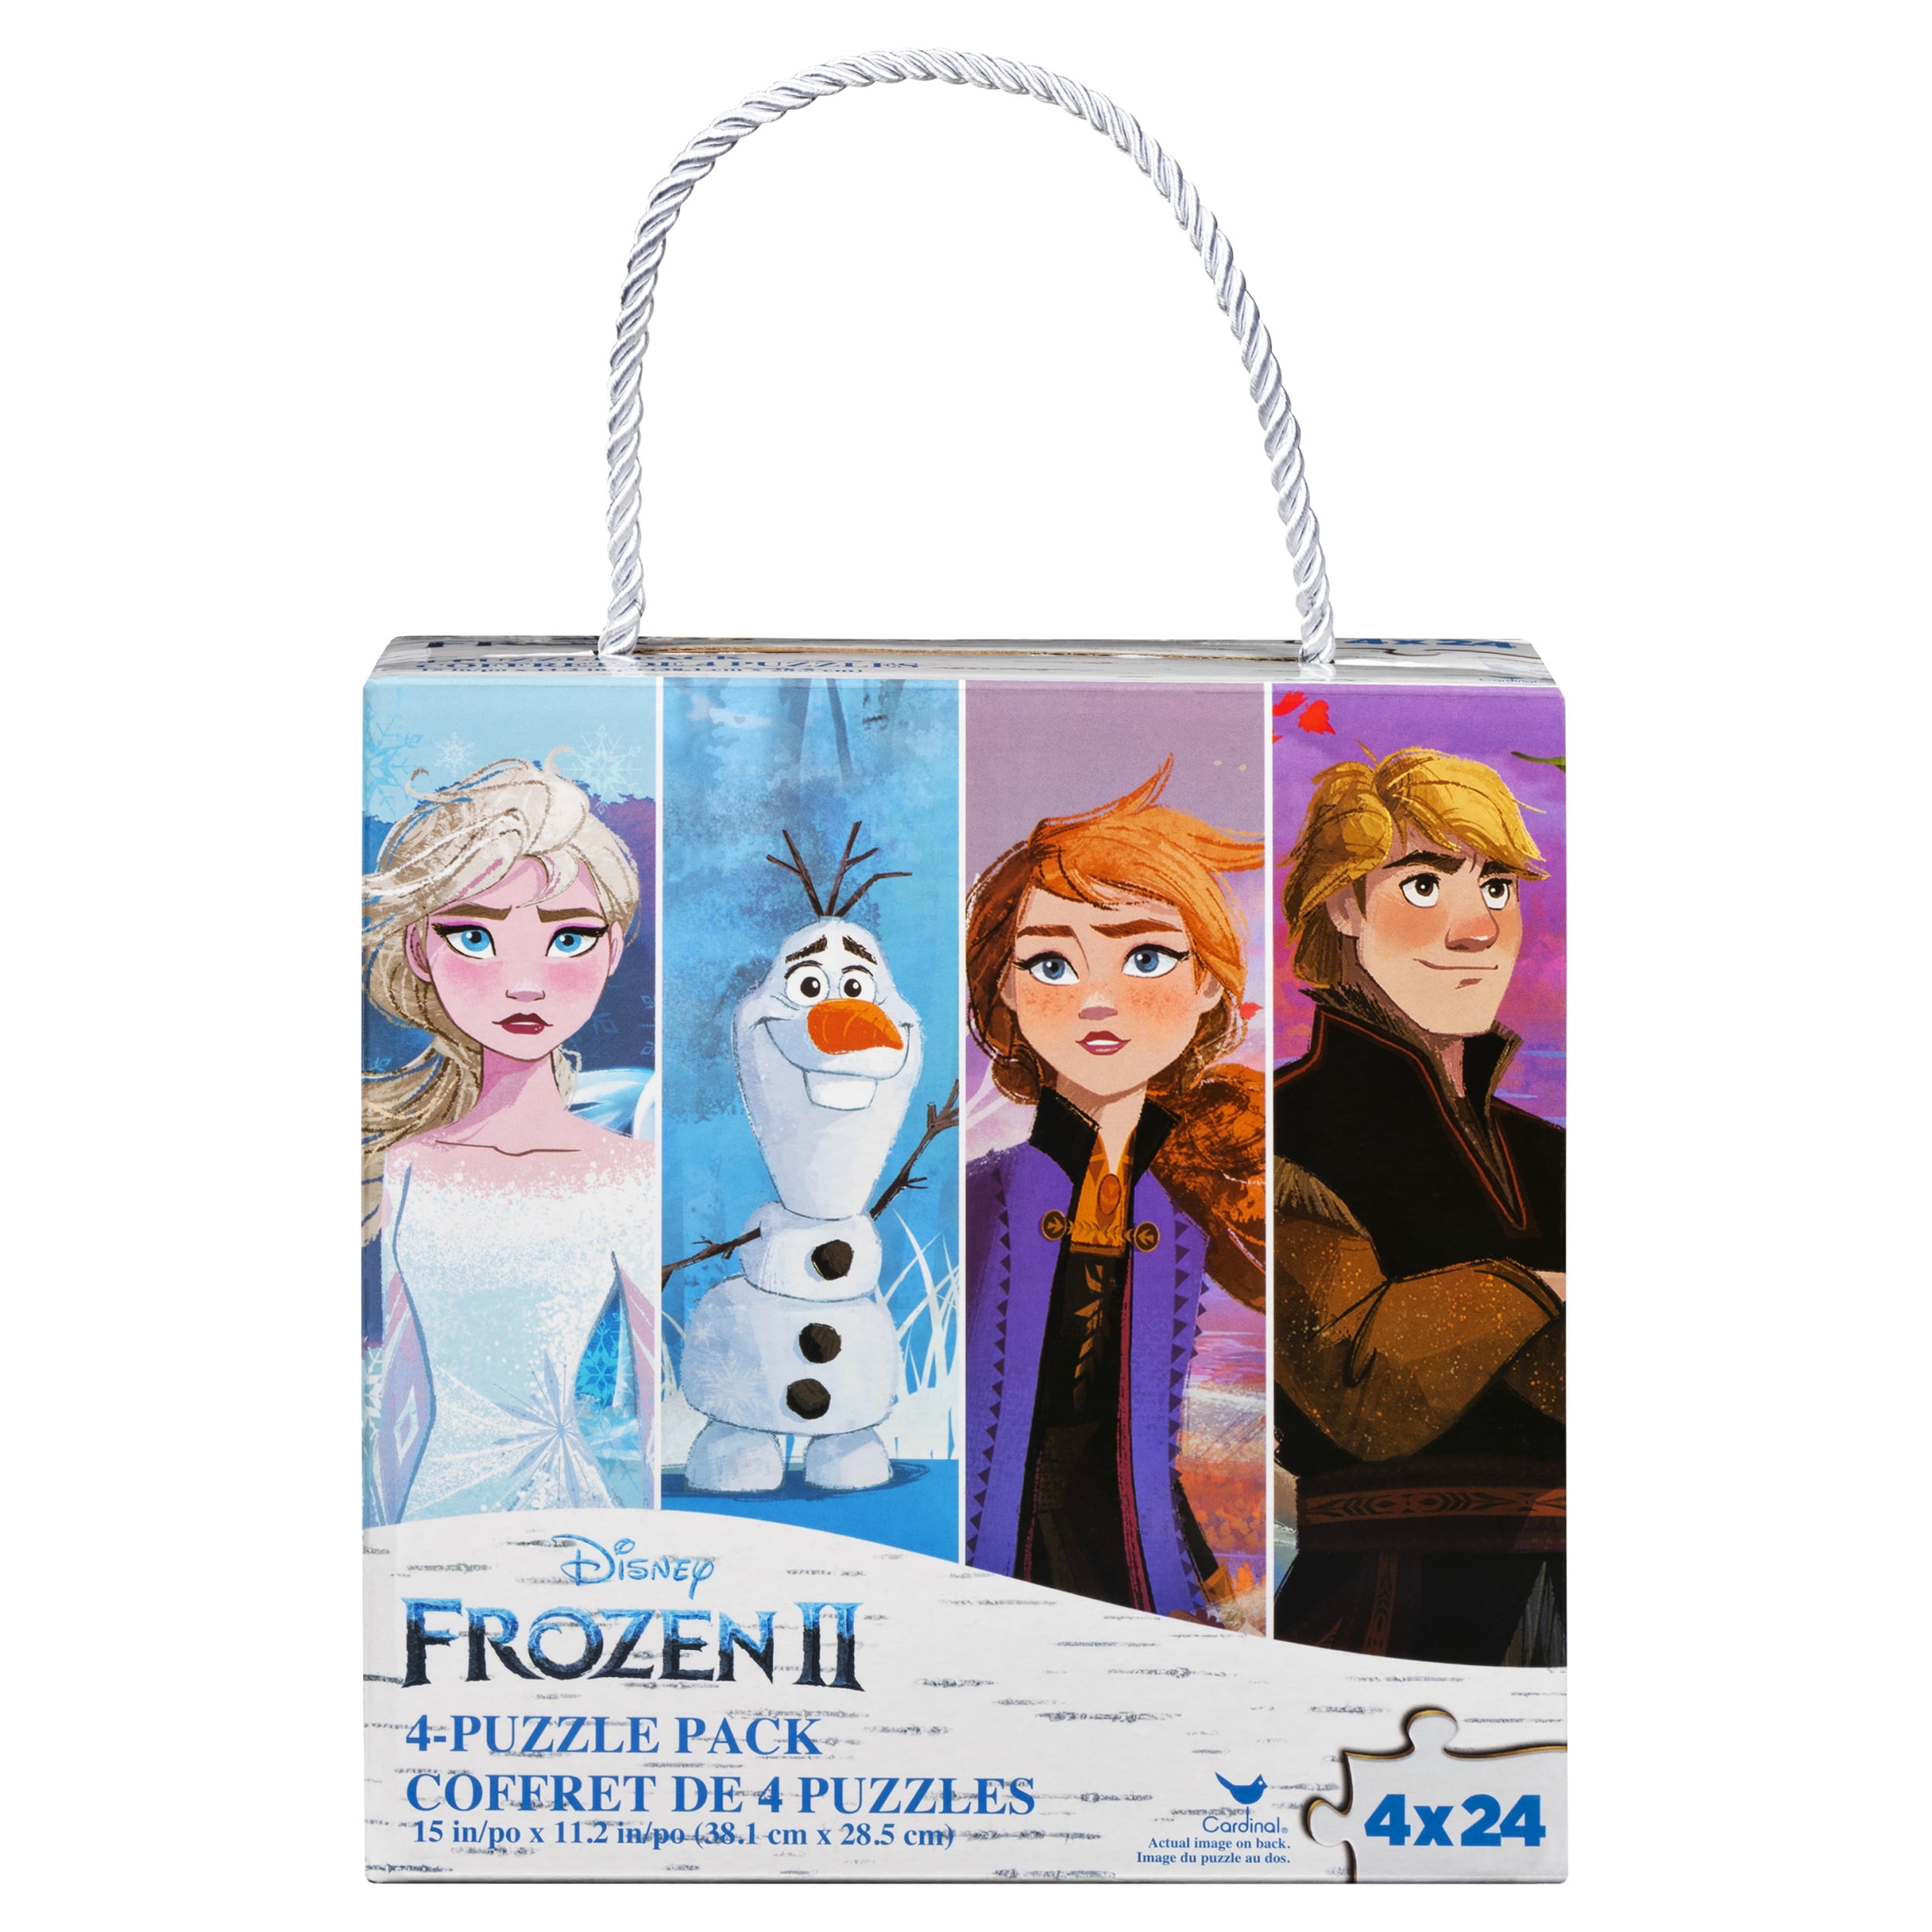 Disney FROZEN Cardinal Games Jigsaw Puzzle 4 Puzzle Pack GREAT VALUE 